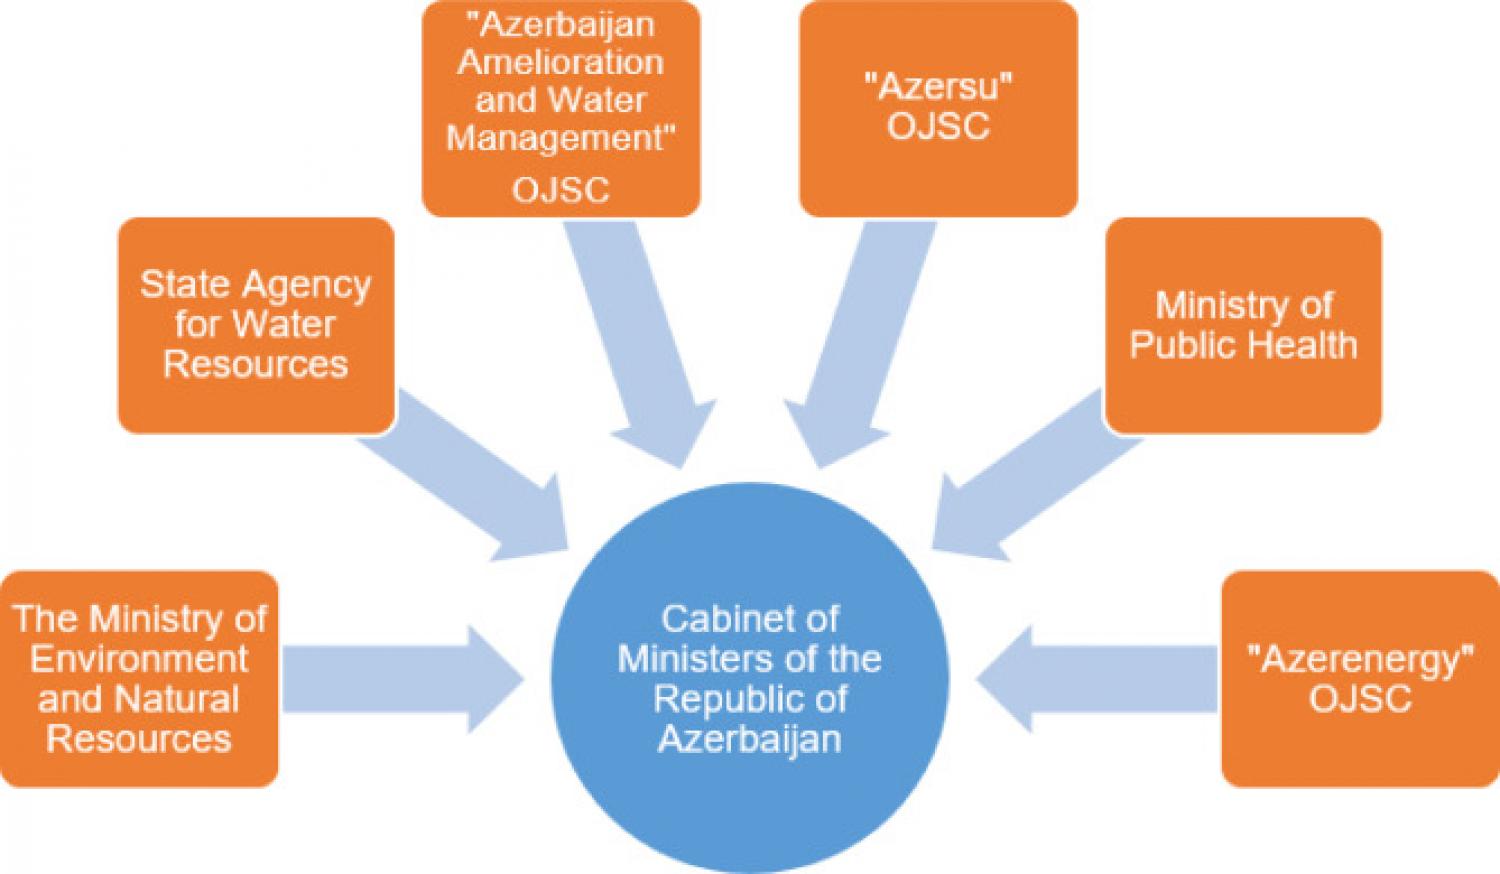 Figure showing the institutional structure in water resources management in Azerbaijan.